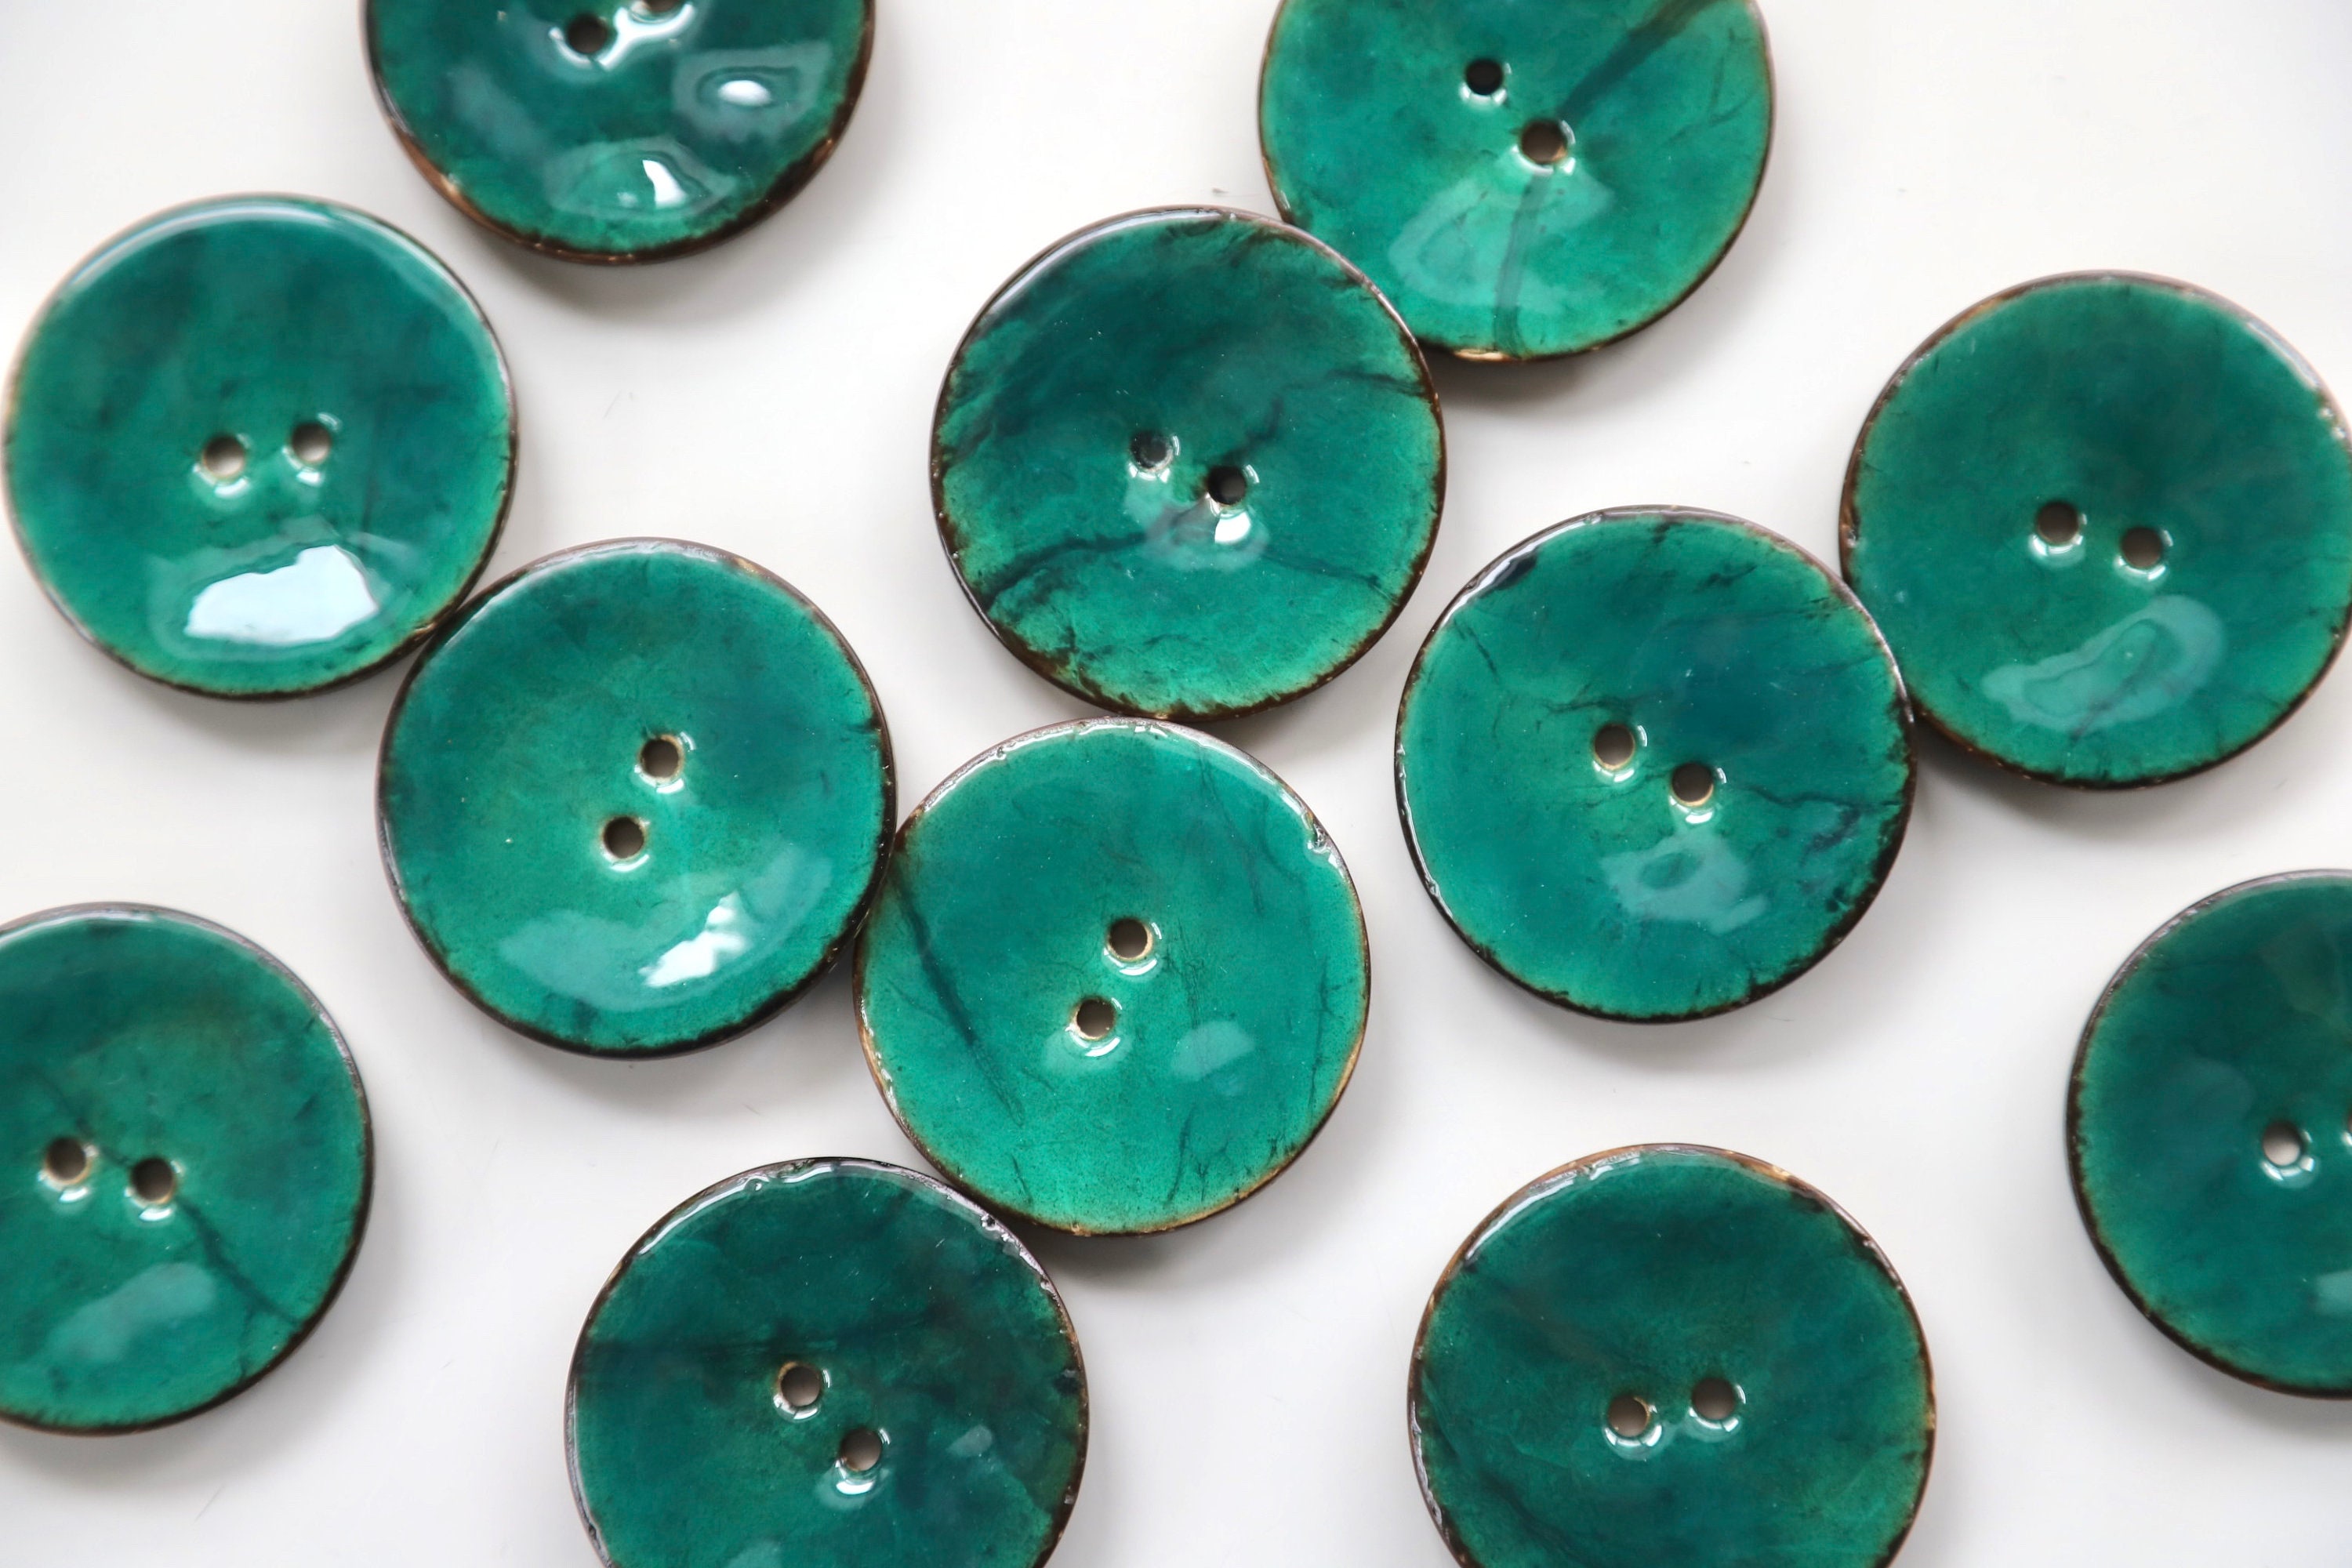 22mm 6 Buttons coconut shell buttons colorful flower ornament suitable for button jewelry